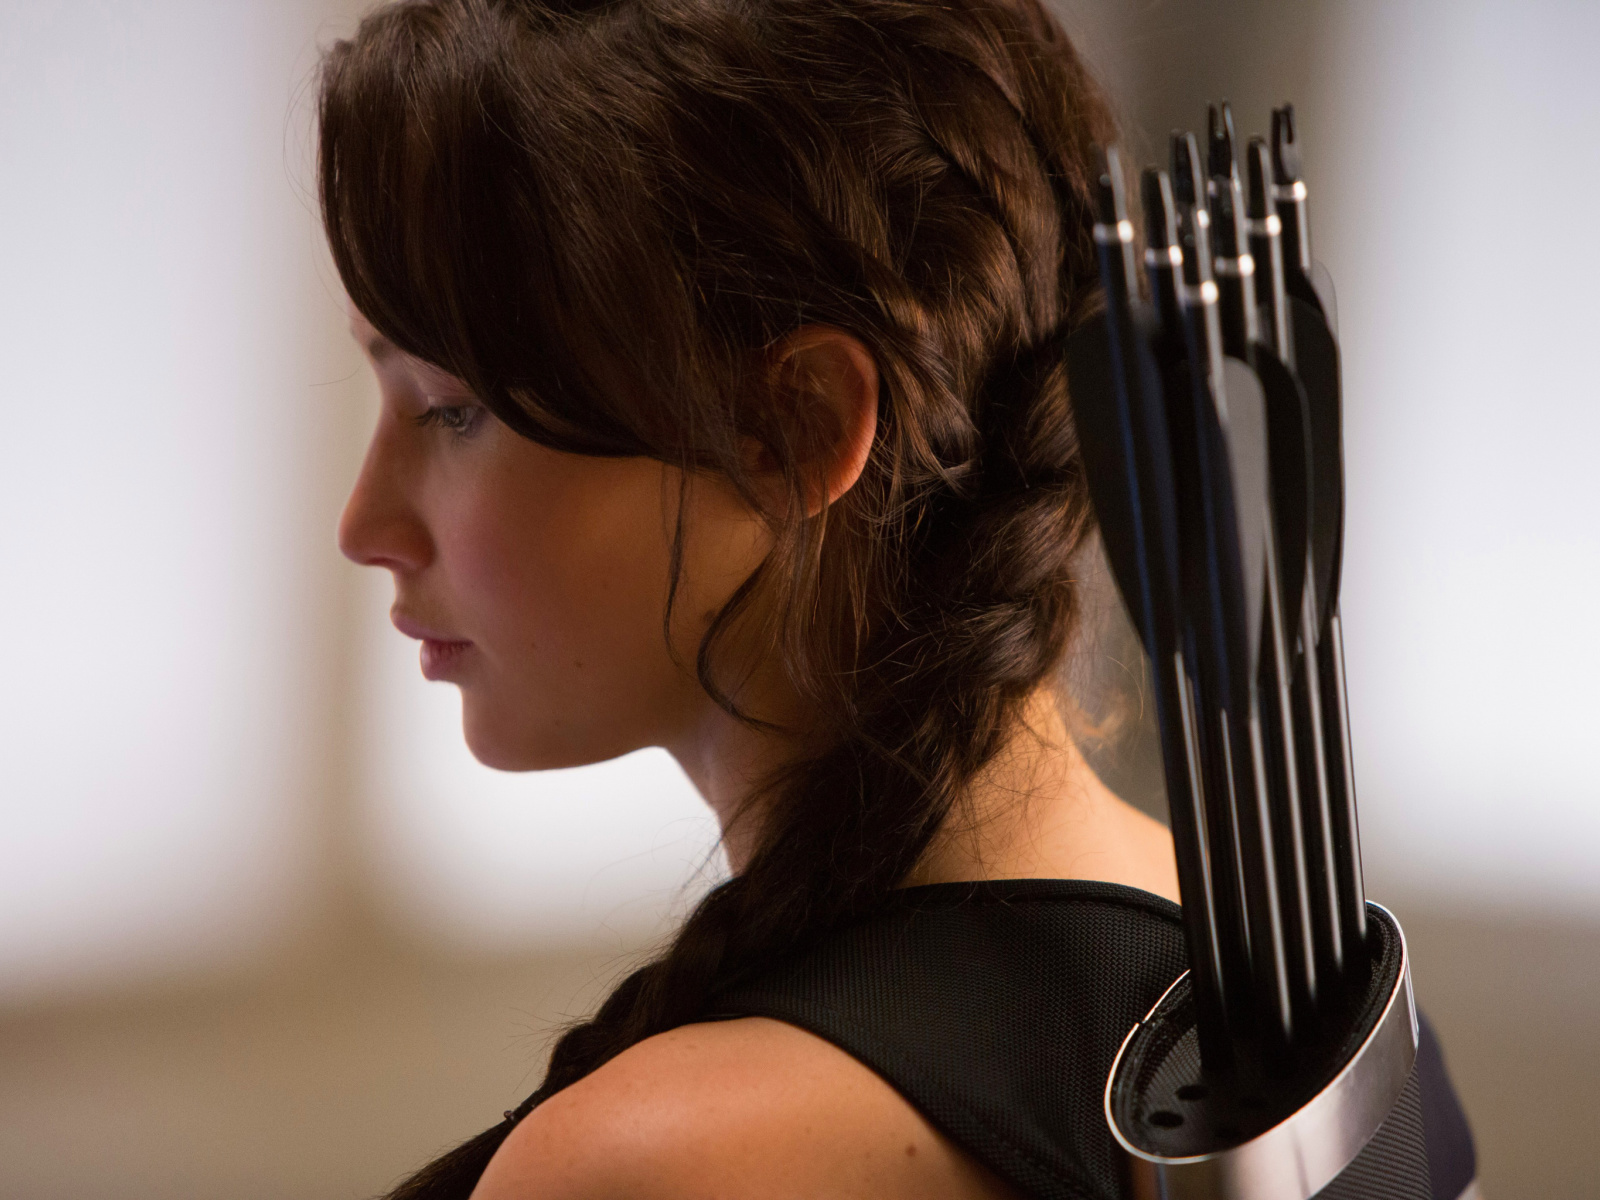 Jennifer lawrence in The Hunger Games Catching Fire screenshot #1 1600x1200